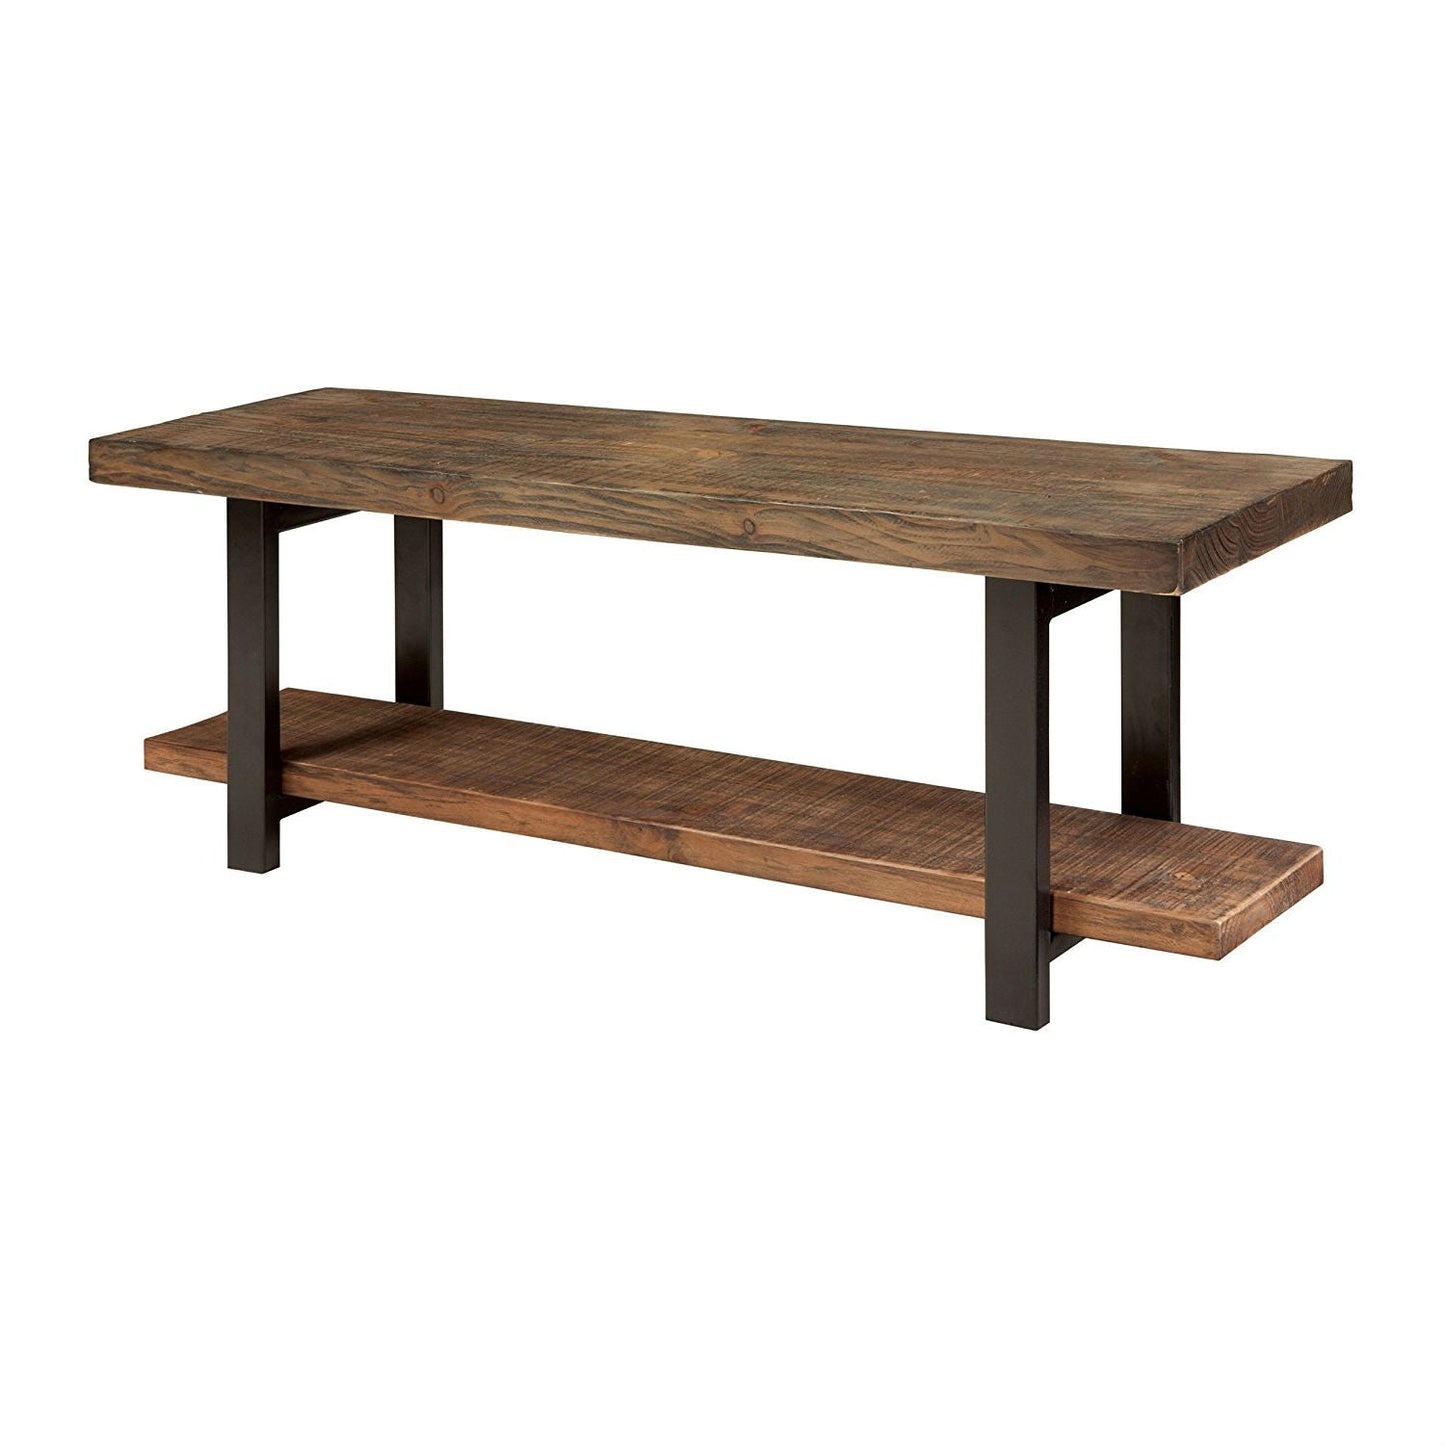 Accents > Benches - Modern Industrial Style Wood And Metal Accent Bench